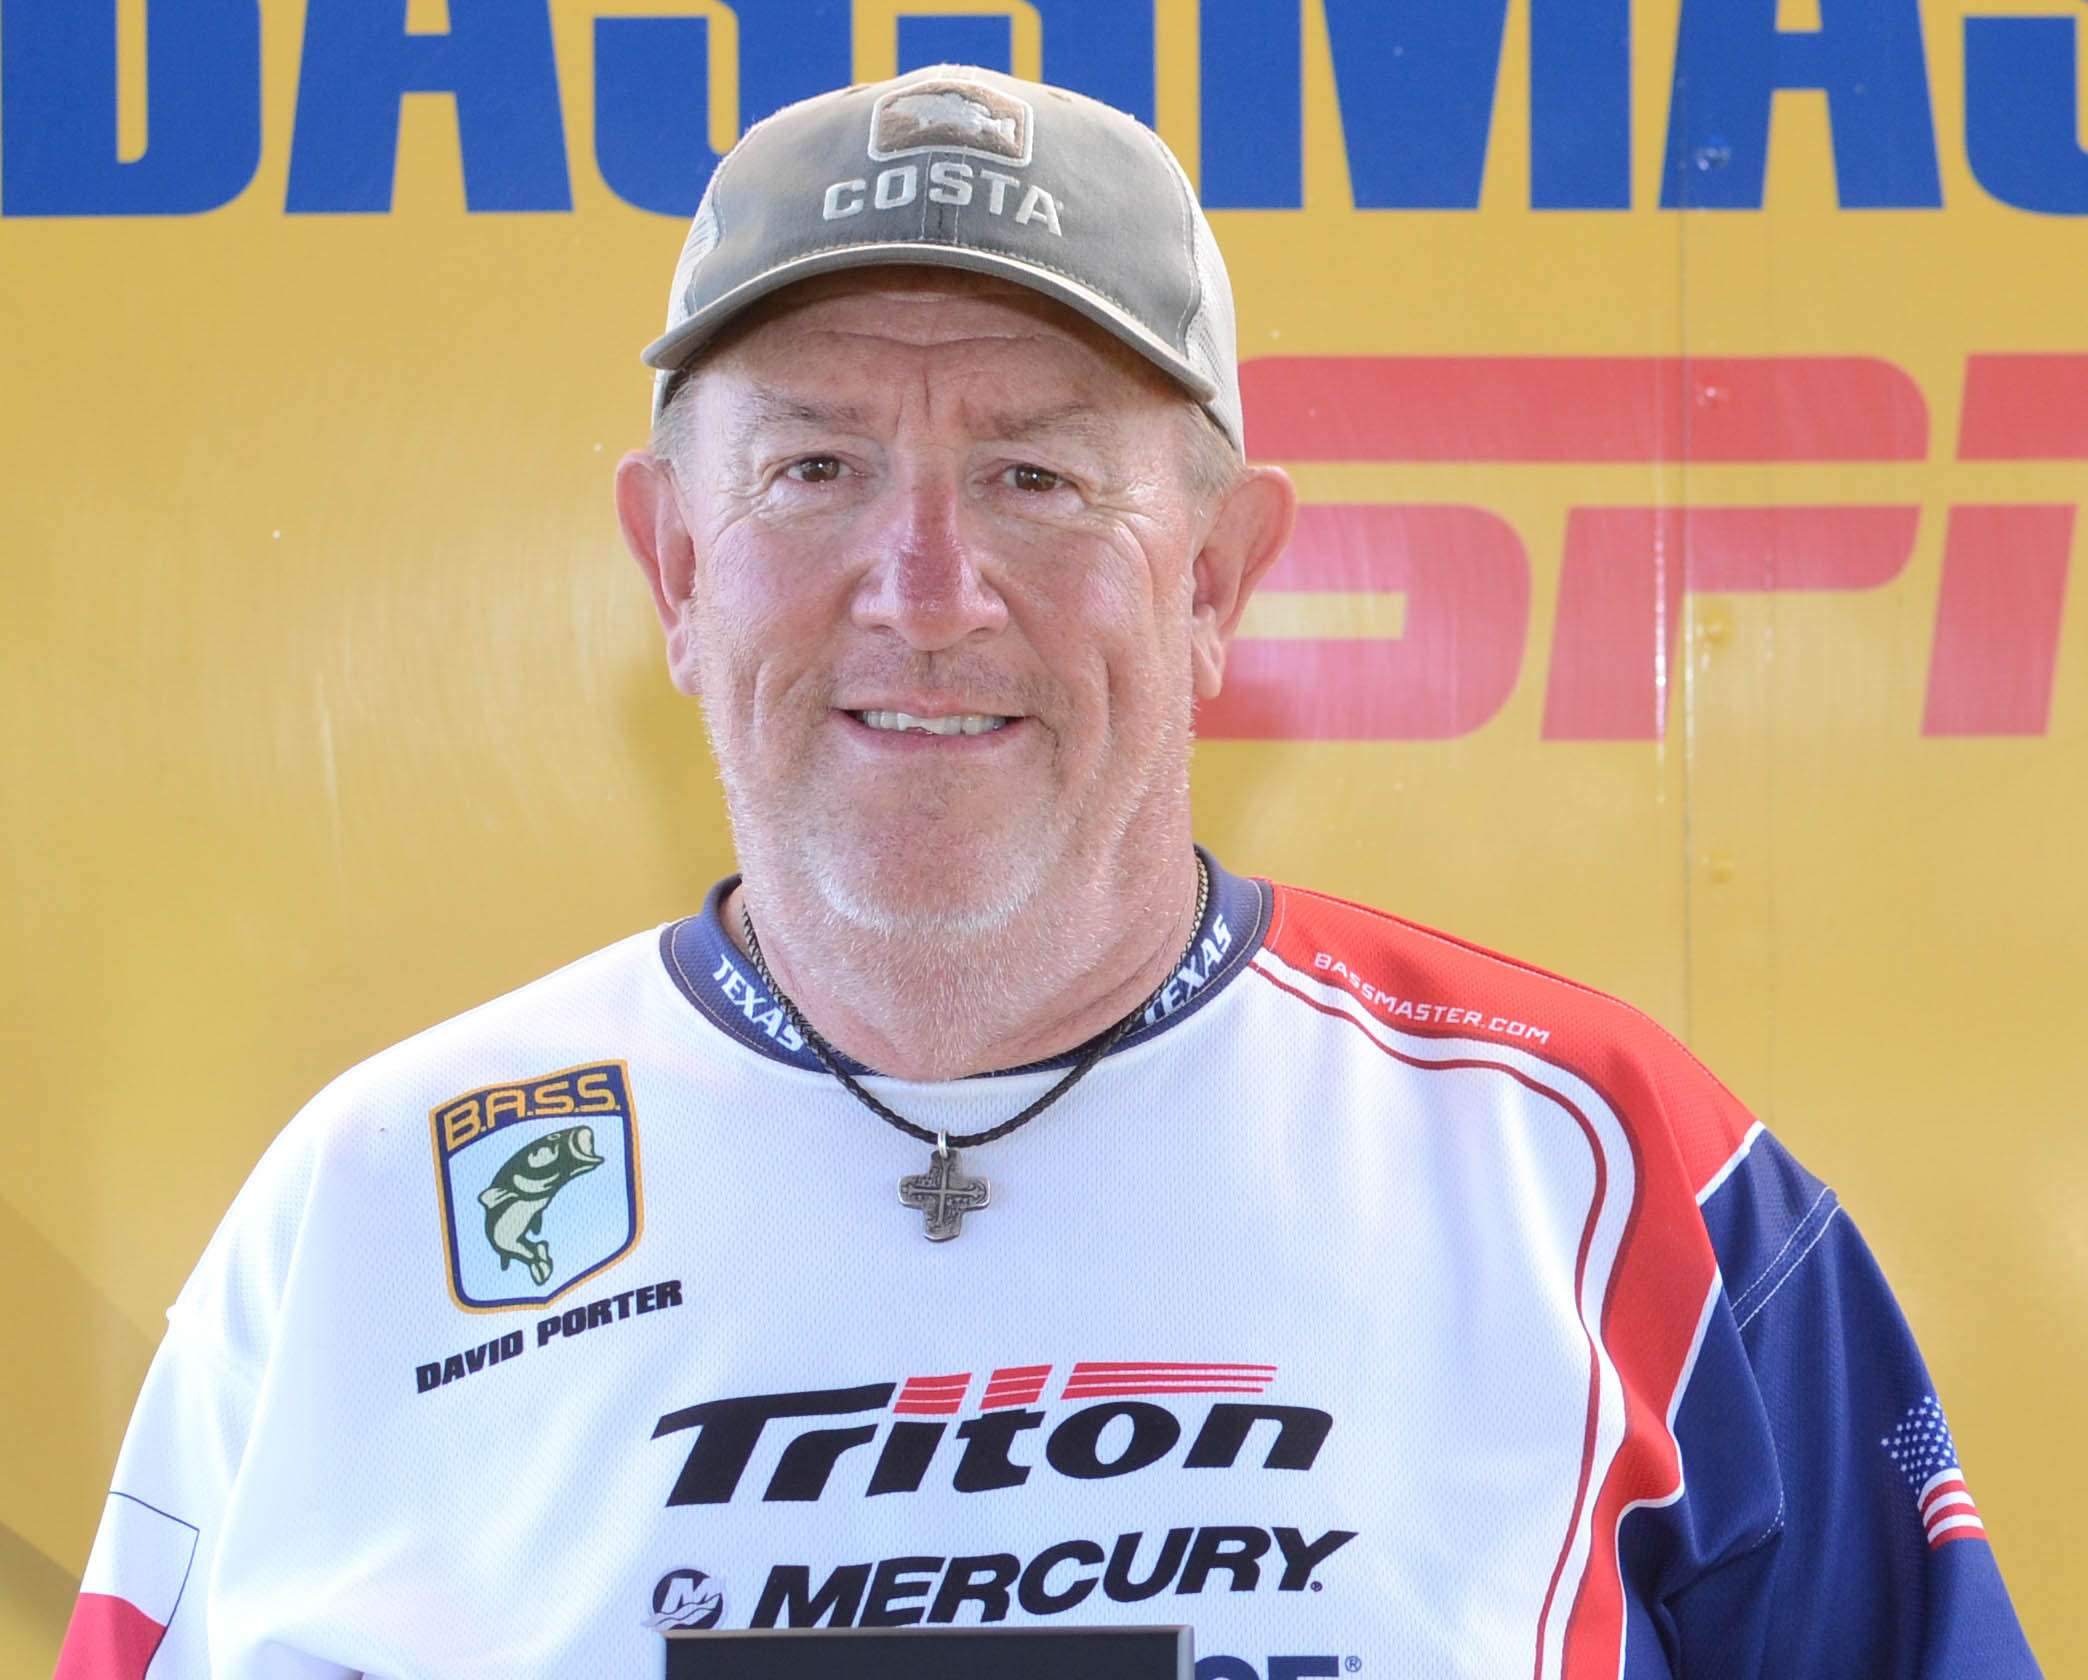 David Porter <br>
Texas Nonboater <br>
David Porter is a senior vice president in sales advertising. He likes hunting, golfing and traveling, as well as fishing with his comrades in the Century Bass Club. This will be his first championship. Heâs sponsored by Waffle House, Resource One Credit Union, George Welch Custom Homes, Coy Rays BBQ, Thermosensors and PIGI. 